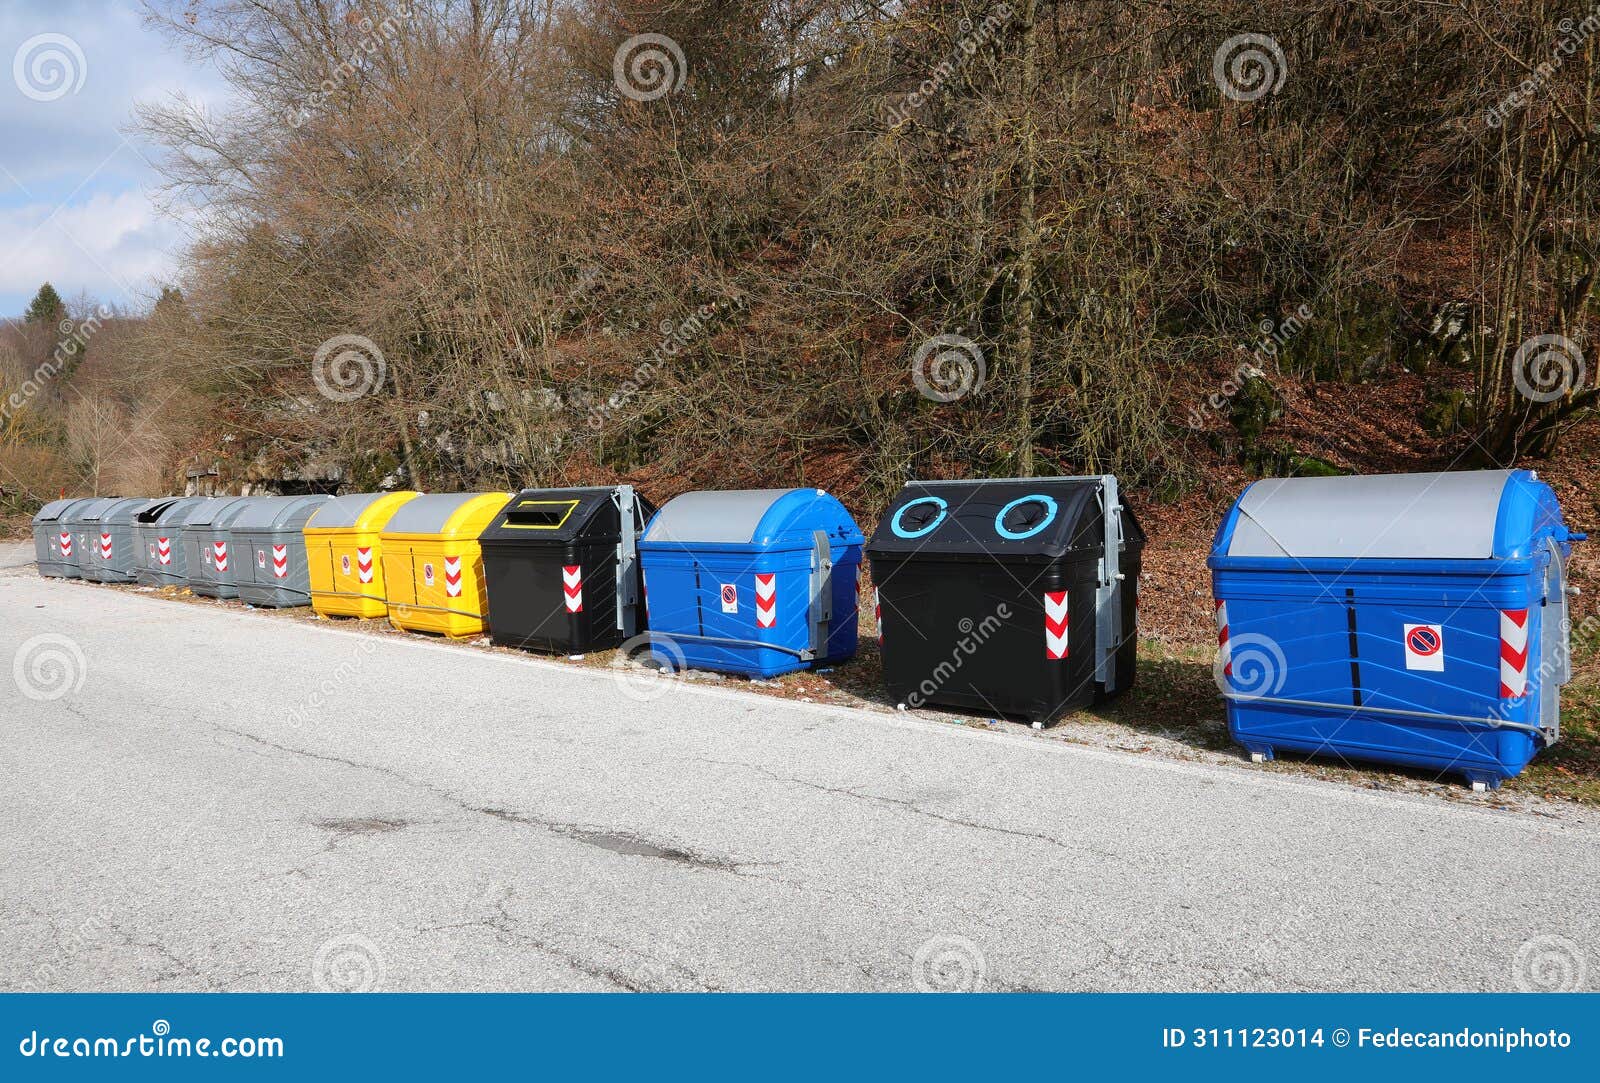 bins for the separate collection of waste in the ecological area for the management of waste materials on the road